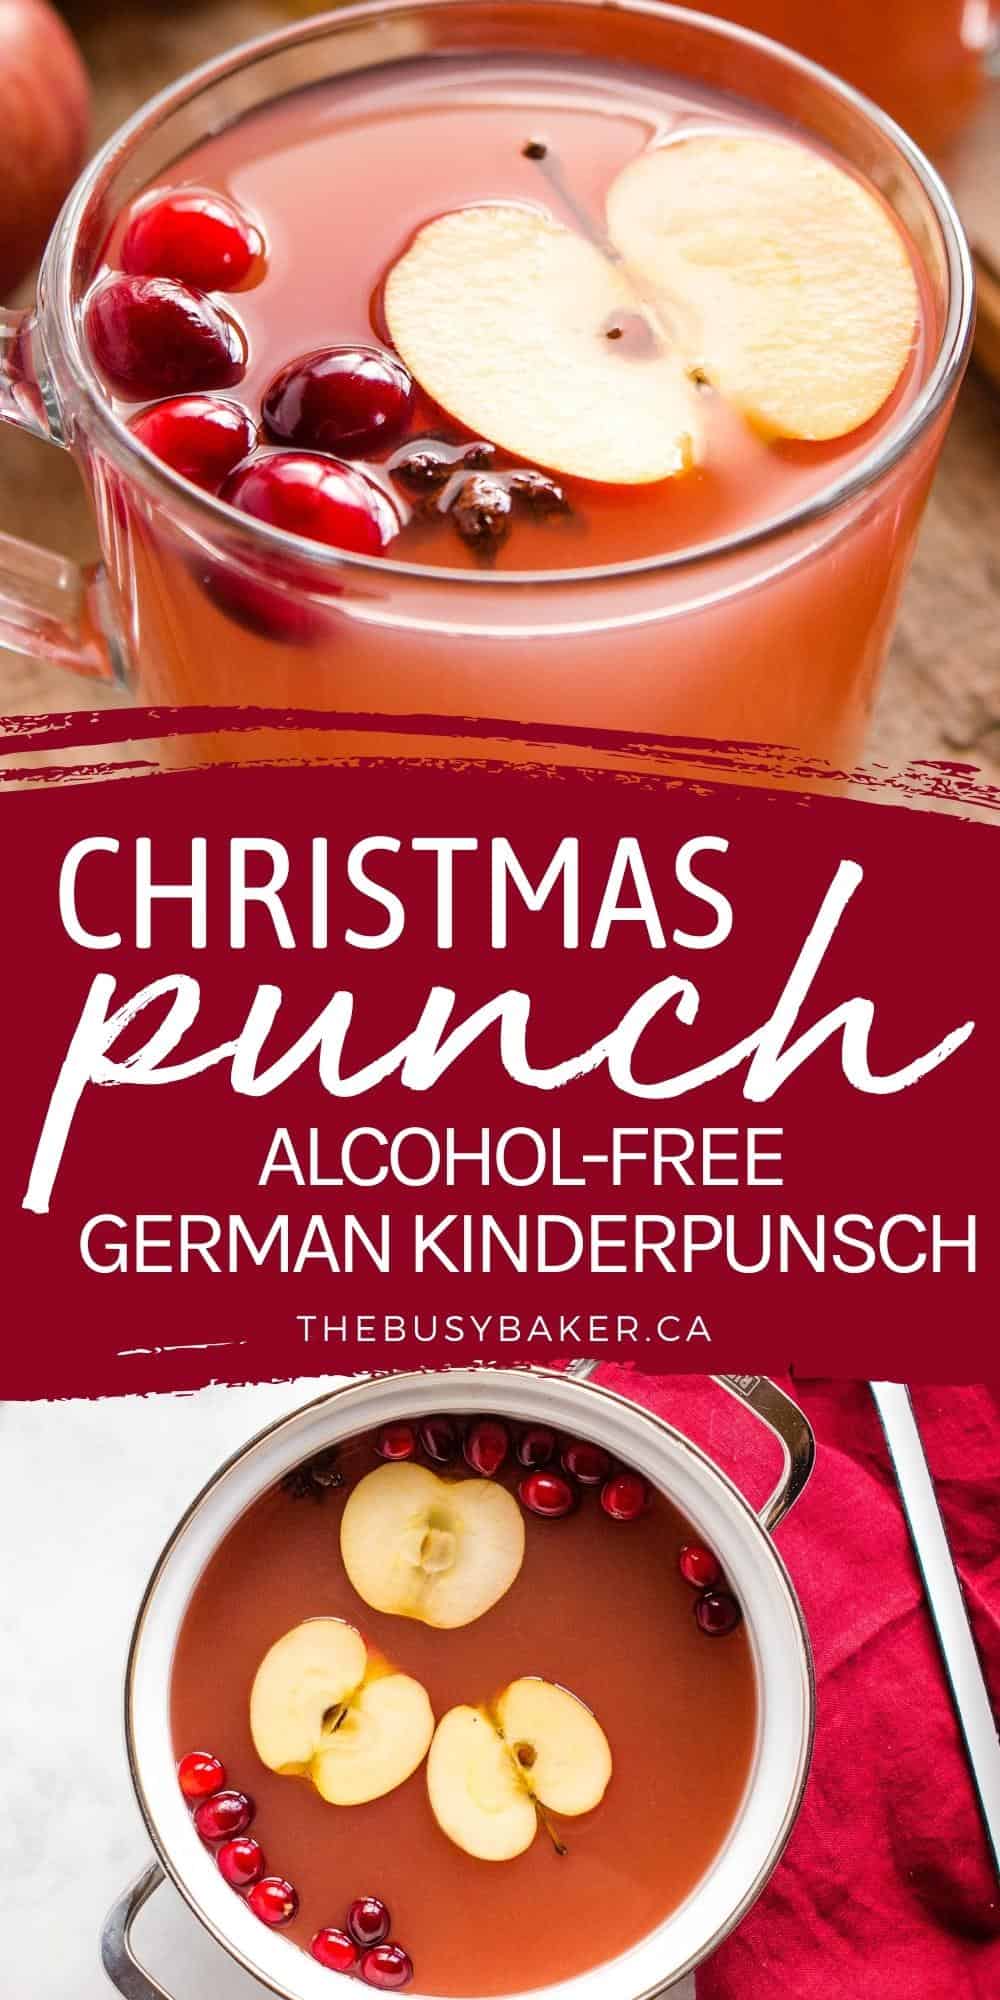 This Kinderpunsch recipe is the perfect German-style non-alcoholic punch recipe for the holiday season made with fruit tea, juice and all the Christmas spices. Perfect for kids! Recipe from thebusybaker.ca! #kinderpunsch #holidaypunch #kidspunch #drinkforkids #childfriendly #holiday #christmas #kidschristmas #christmasrecipe via @busybakerblog